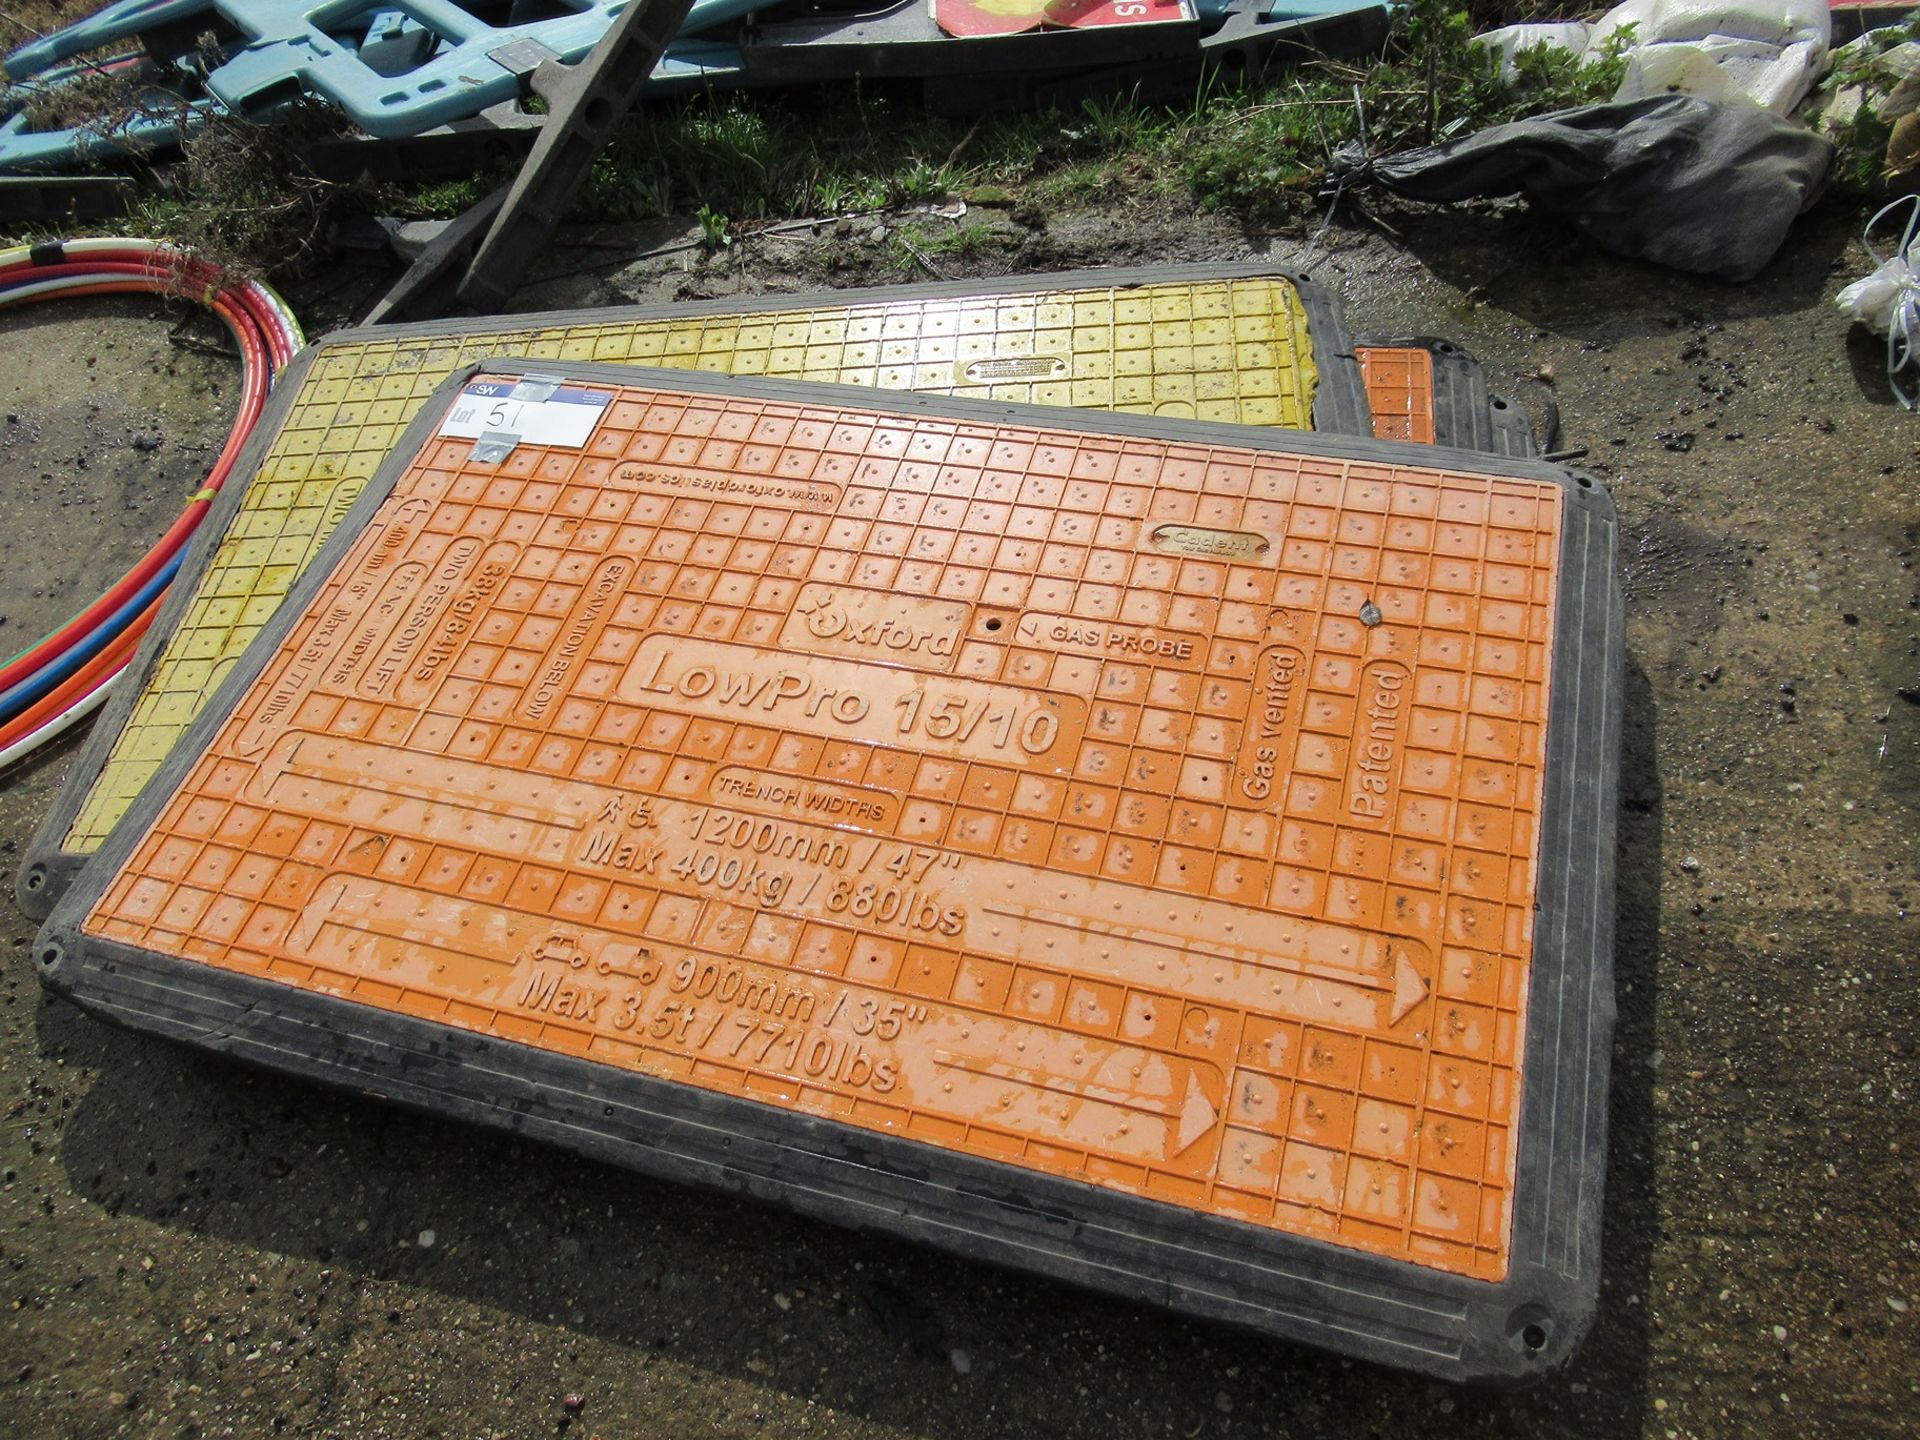 4 LowPro 15/10 Driveway Boards(Lot located at Westwood Park, London Road, Colchester, CO6 4BS)Please